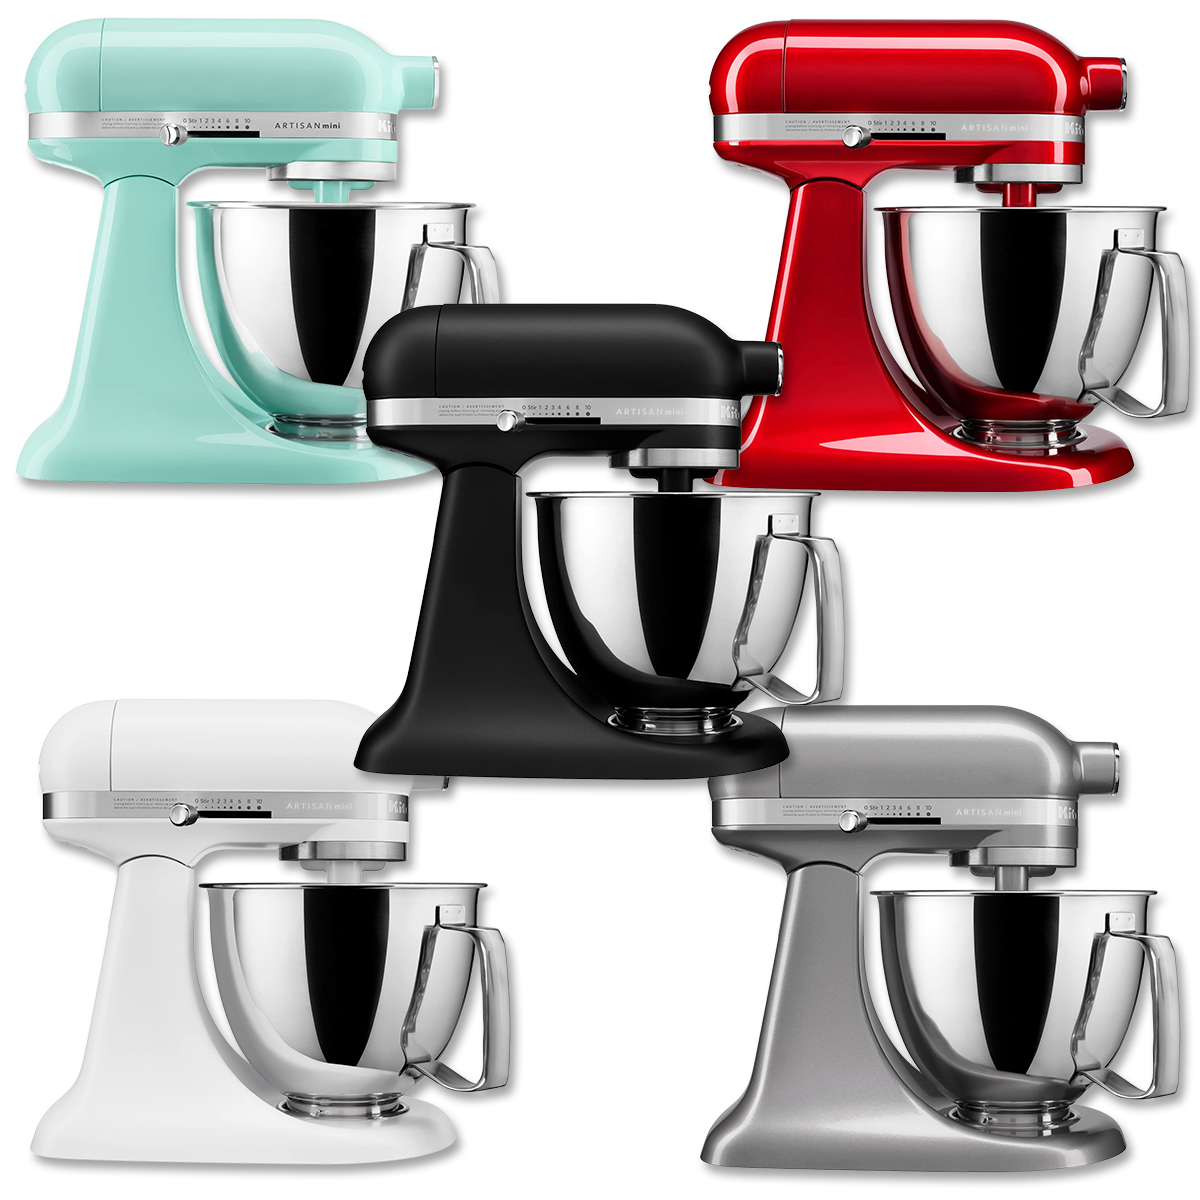 KitchenAid stand mixer on sale: Save 41% with this bundle from